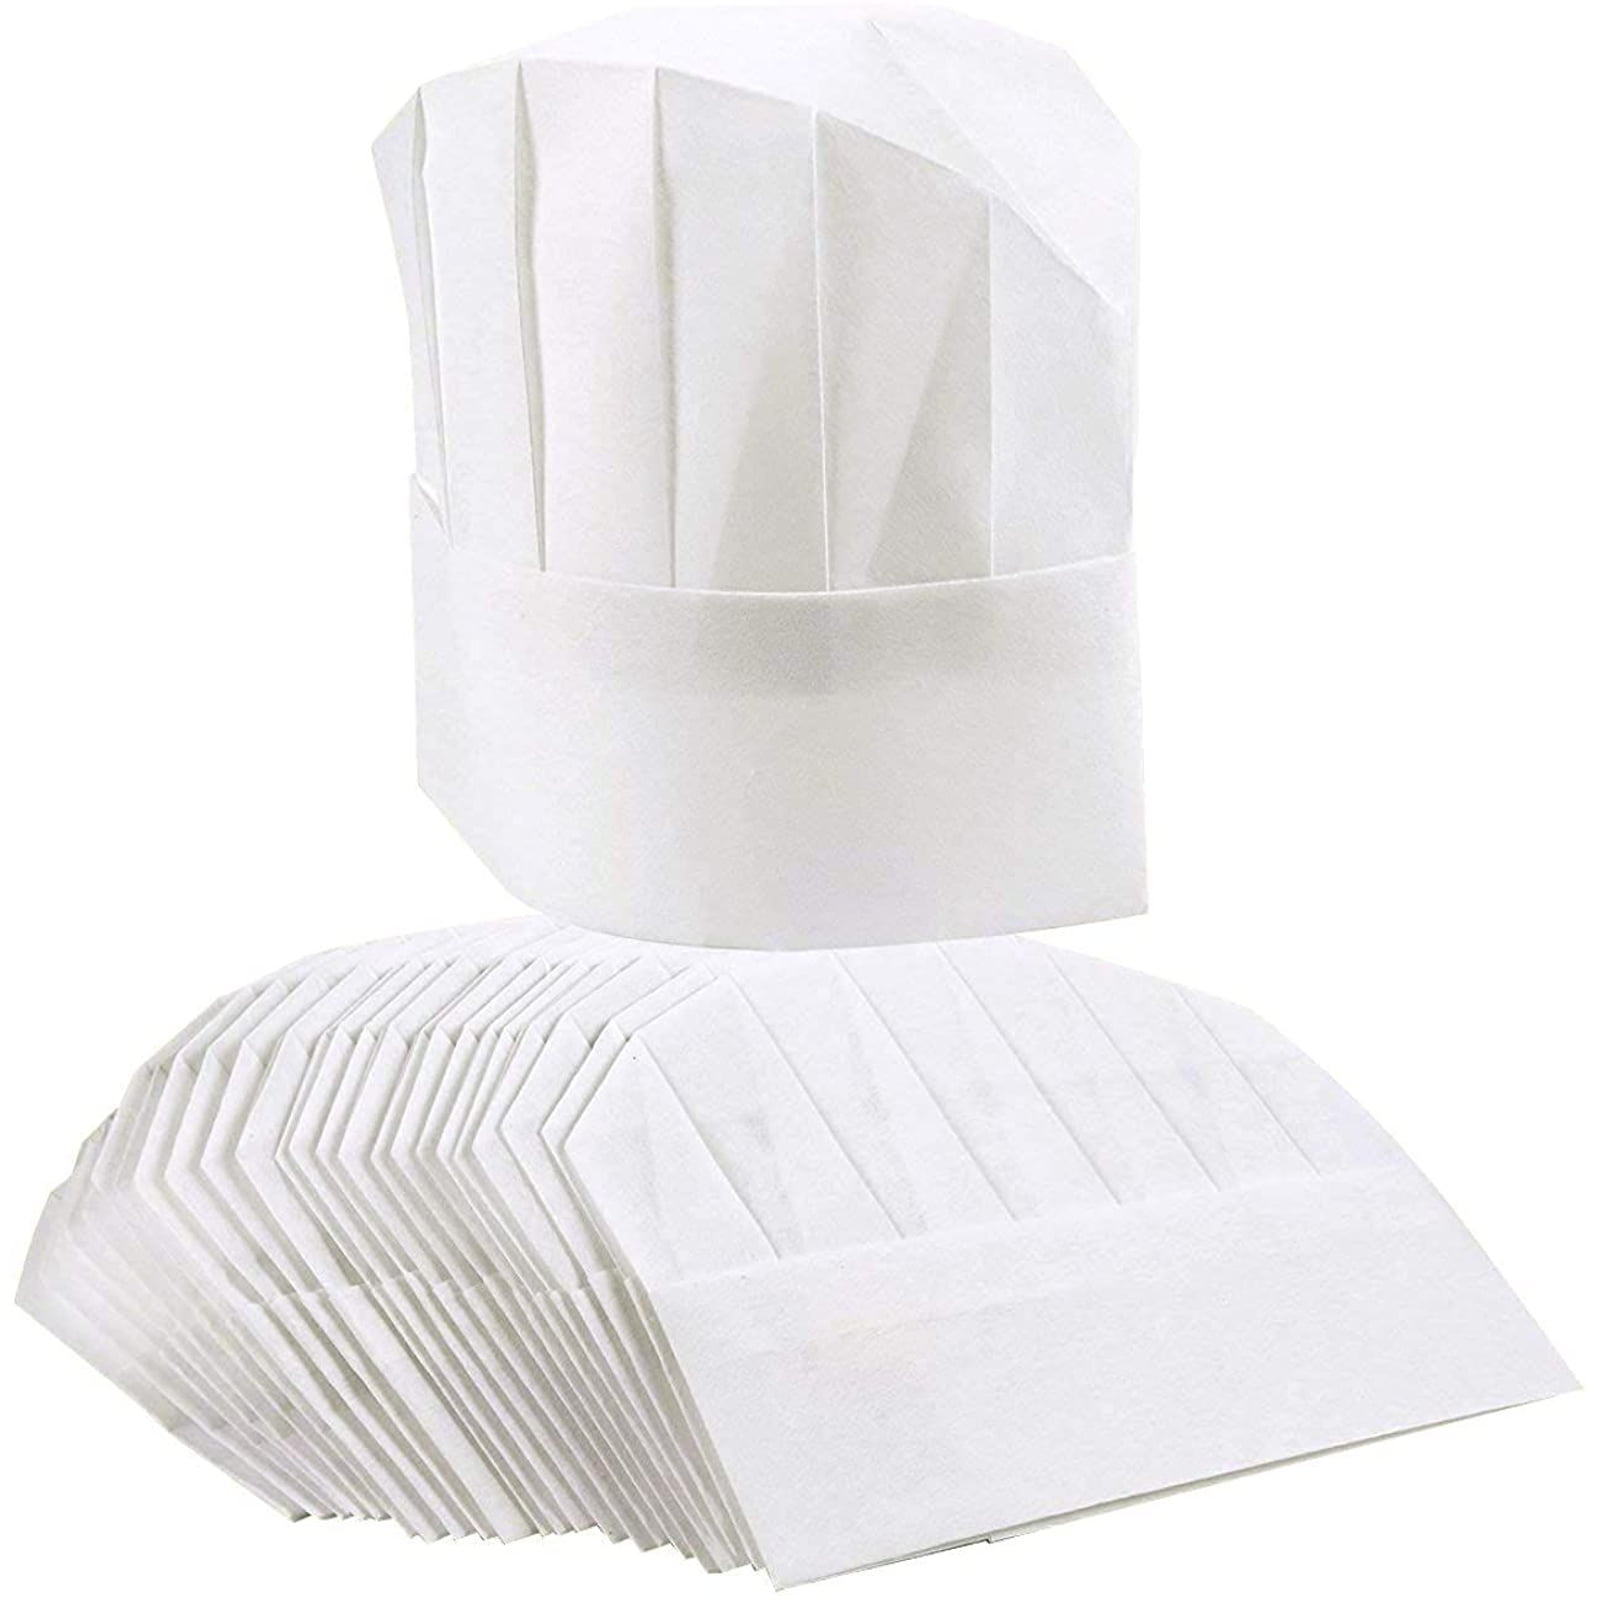 New Elastic Chef Hat Kitchen Baking Cooking Party Costume Cap For Adult KidWhite 